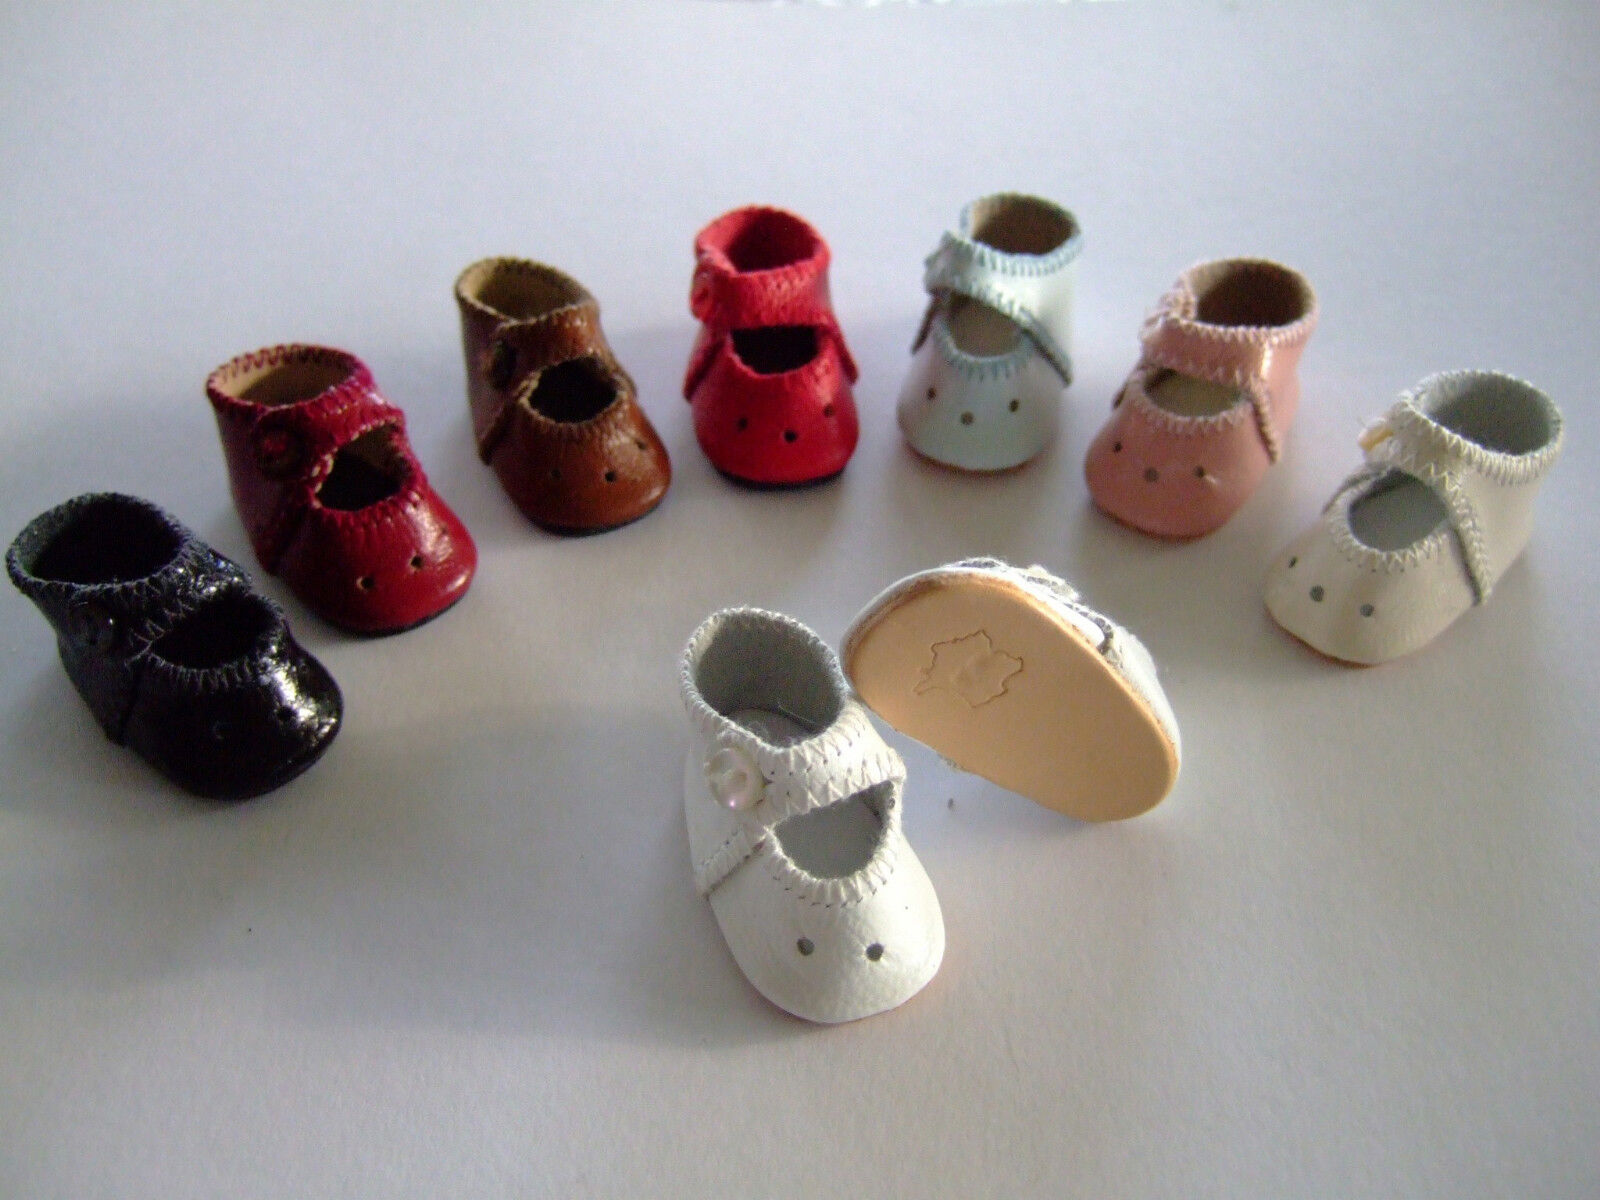 1 pair of BLEUETTE Doll Leather shoes for antique or repro doll. 40mm. 11 colors